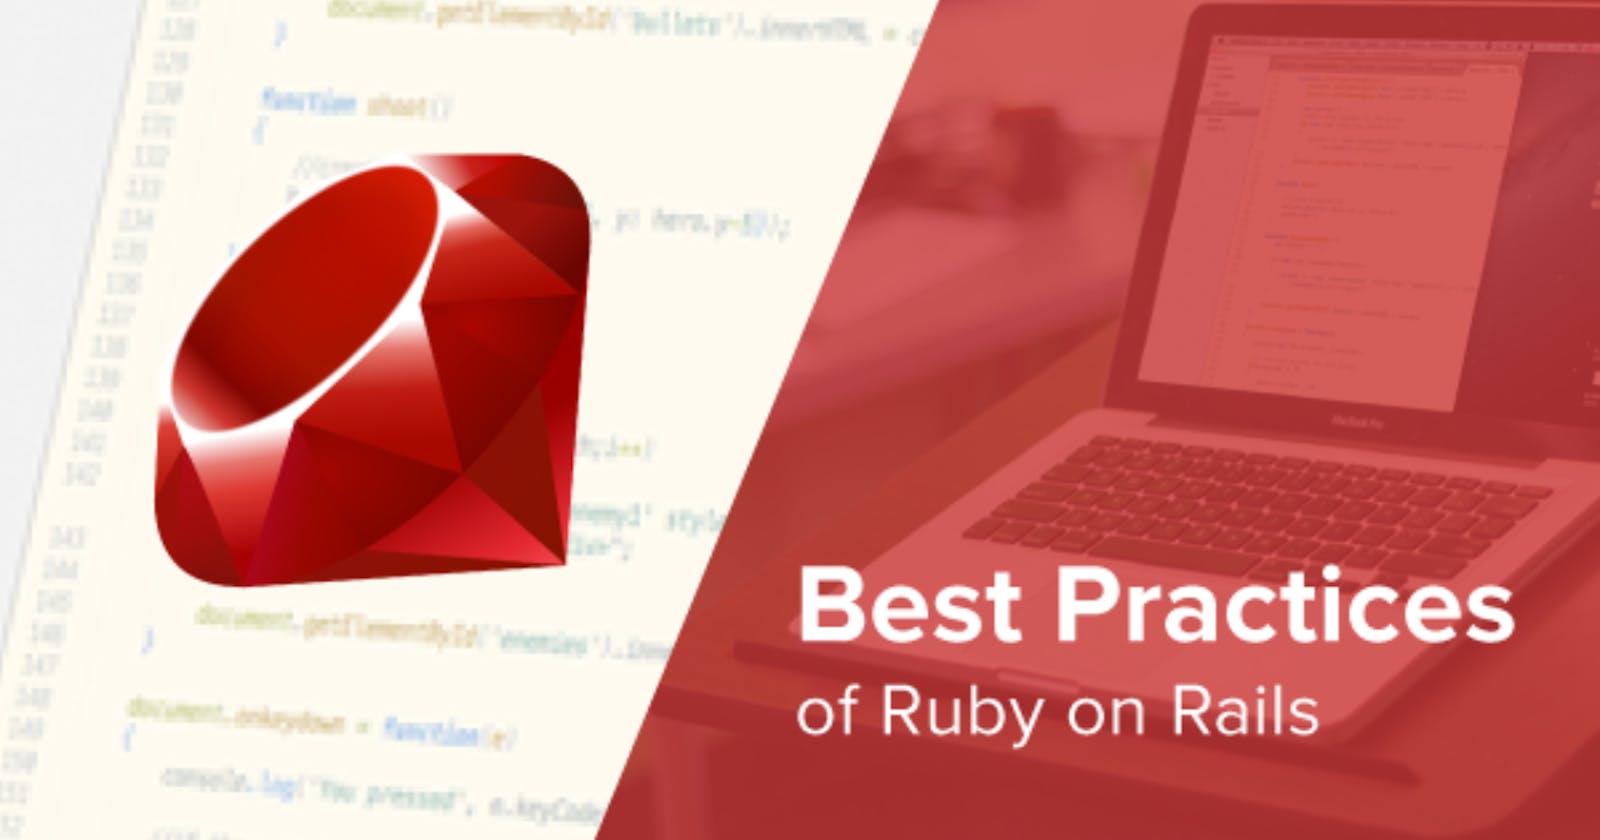 Ruby on Rails Best Practices in coming 2023!